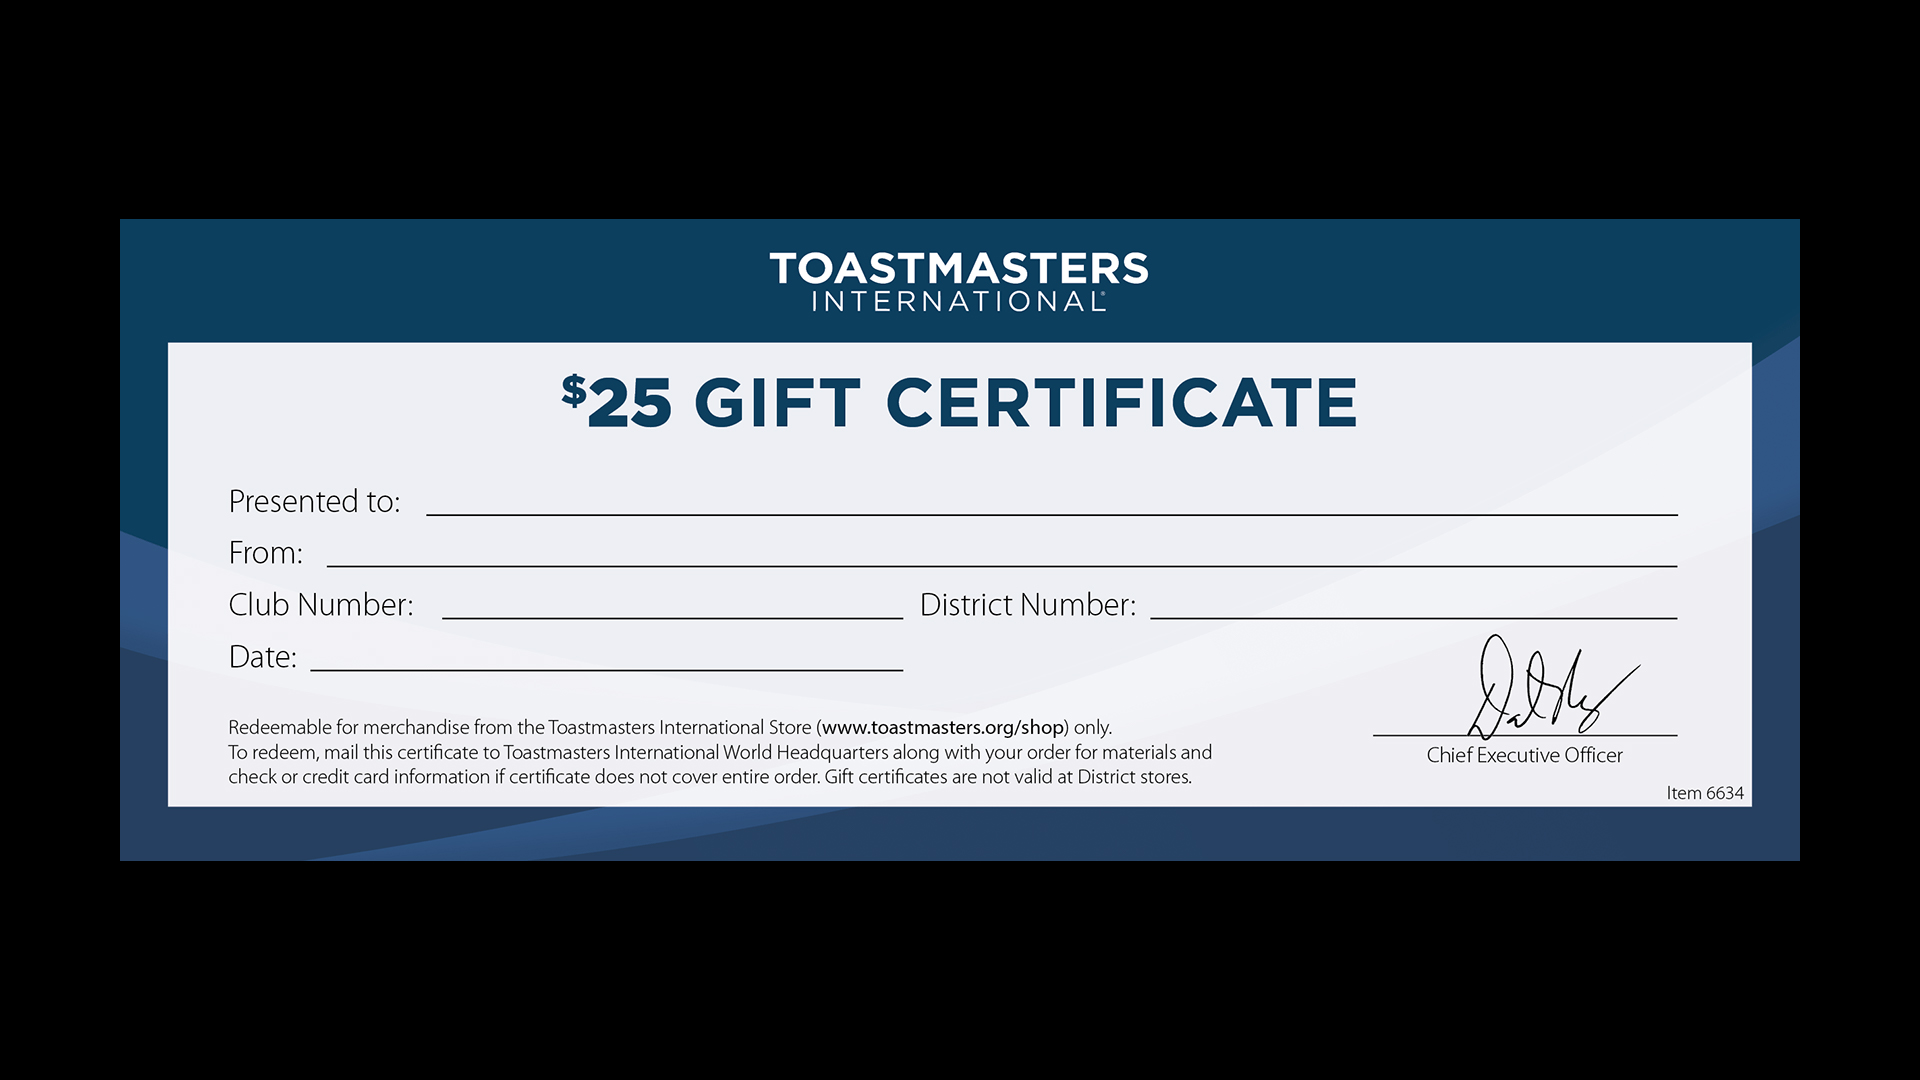 A $25 Toastmasters Gift Certificate